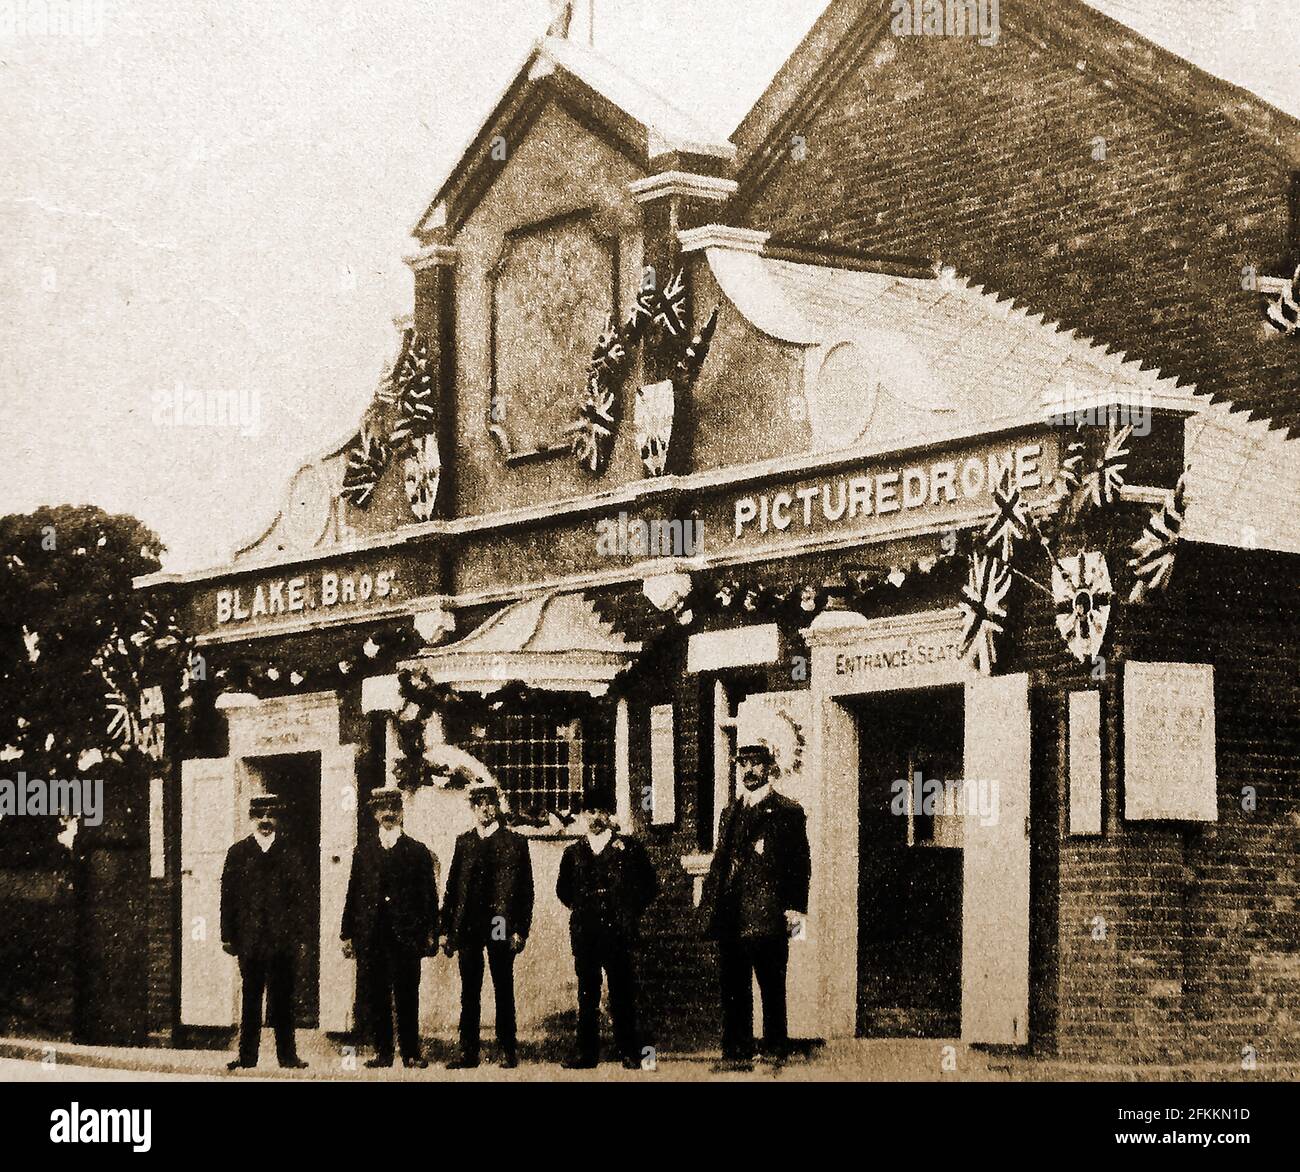 1911 - One of the1st purpose built cinemas in Britain , The Blake Brothers Picturedome at Hitchen Herts, is shown decorated for the coronation of  George V and his wife Mary as king and queen of the United Kingdom (and the British Empire). The brothers had already  opened their first  Picturedrome in Bedford .  Jim and Archie Blake  photographic businessmen chose Hitchen for their second purpose-built cinema. The 400 seat cinema  first opened around March 1911. Stock Photo